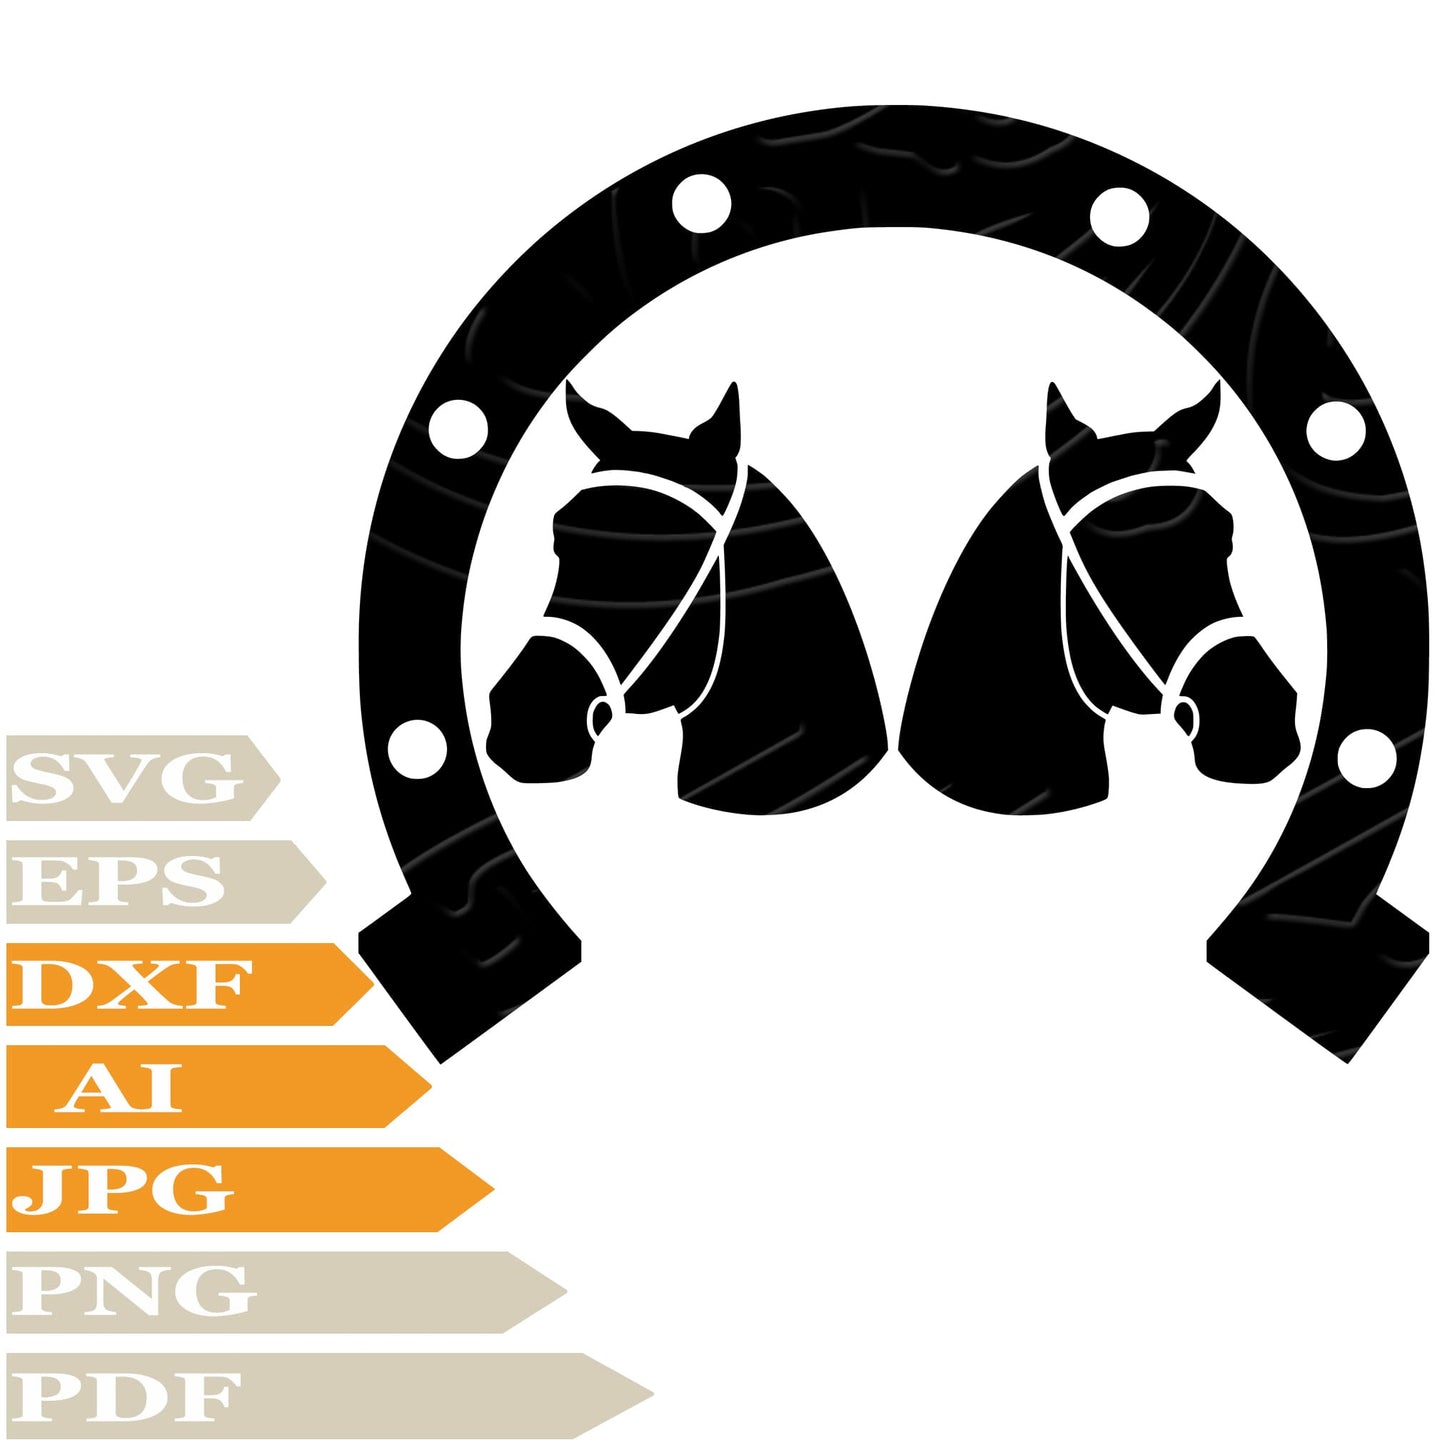 Horse SVG, Horseshoe SVG Design, Black Horses Vector Graphics, Horse Head For Cricut, For Tattoo, Clip Art, Cut File, T-Shirts, Silhouette, All Available